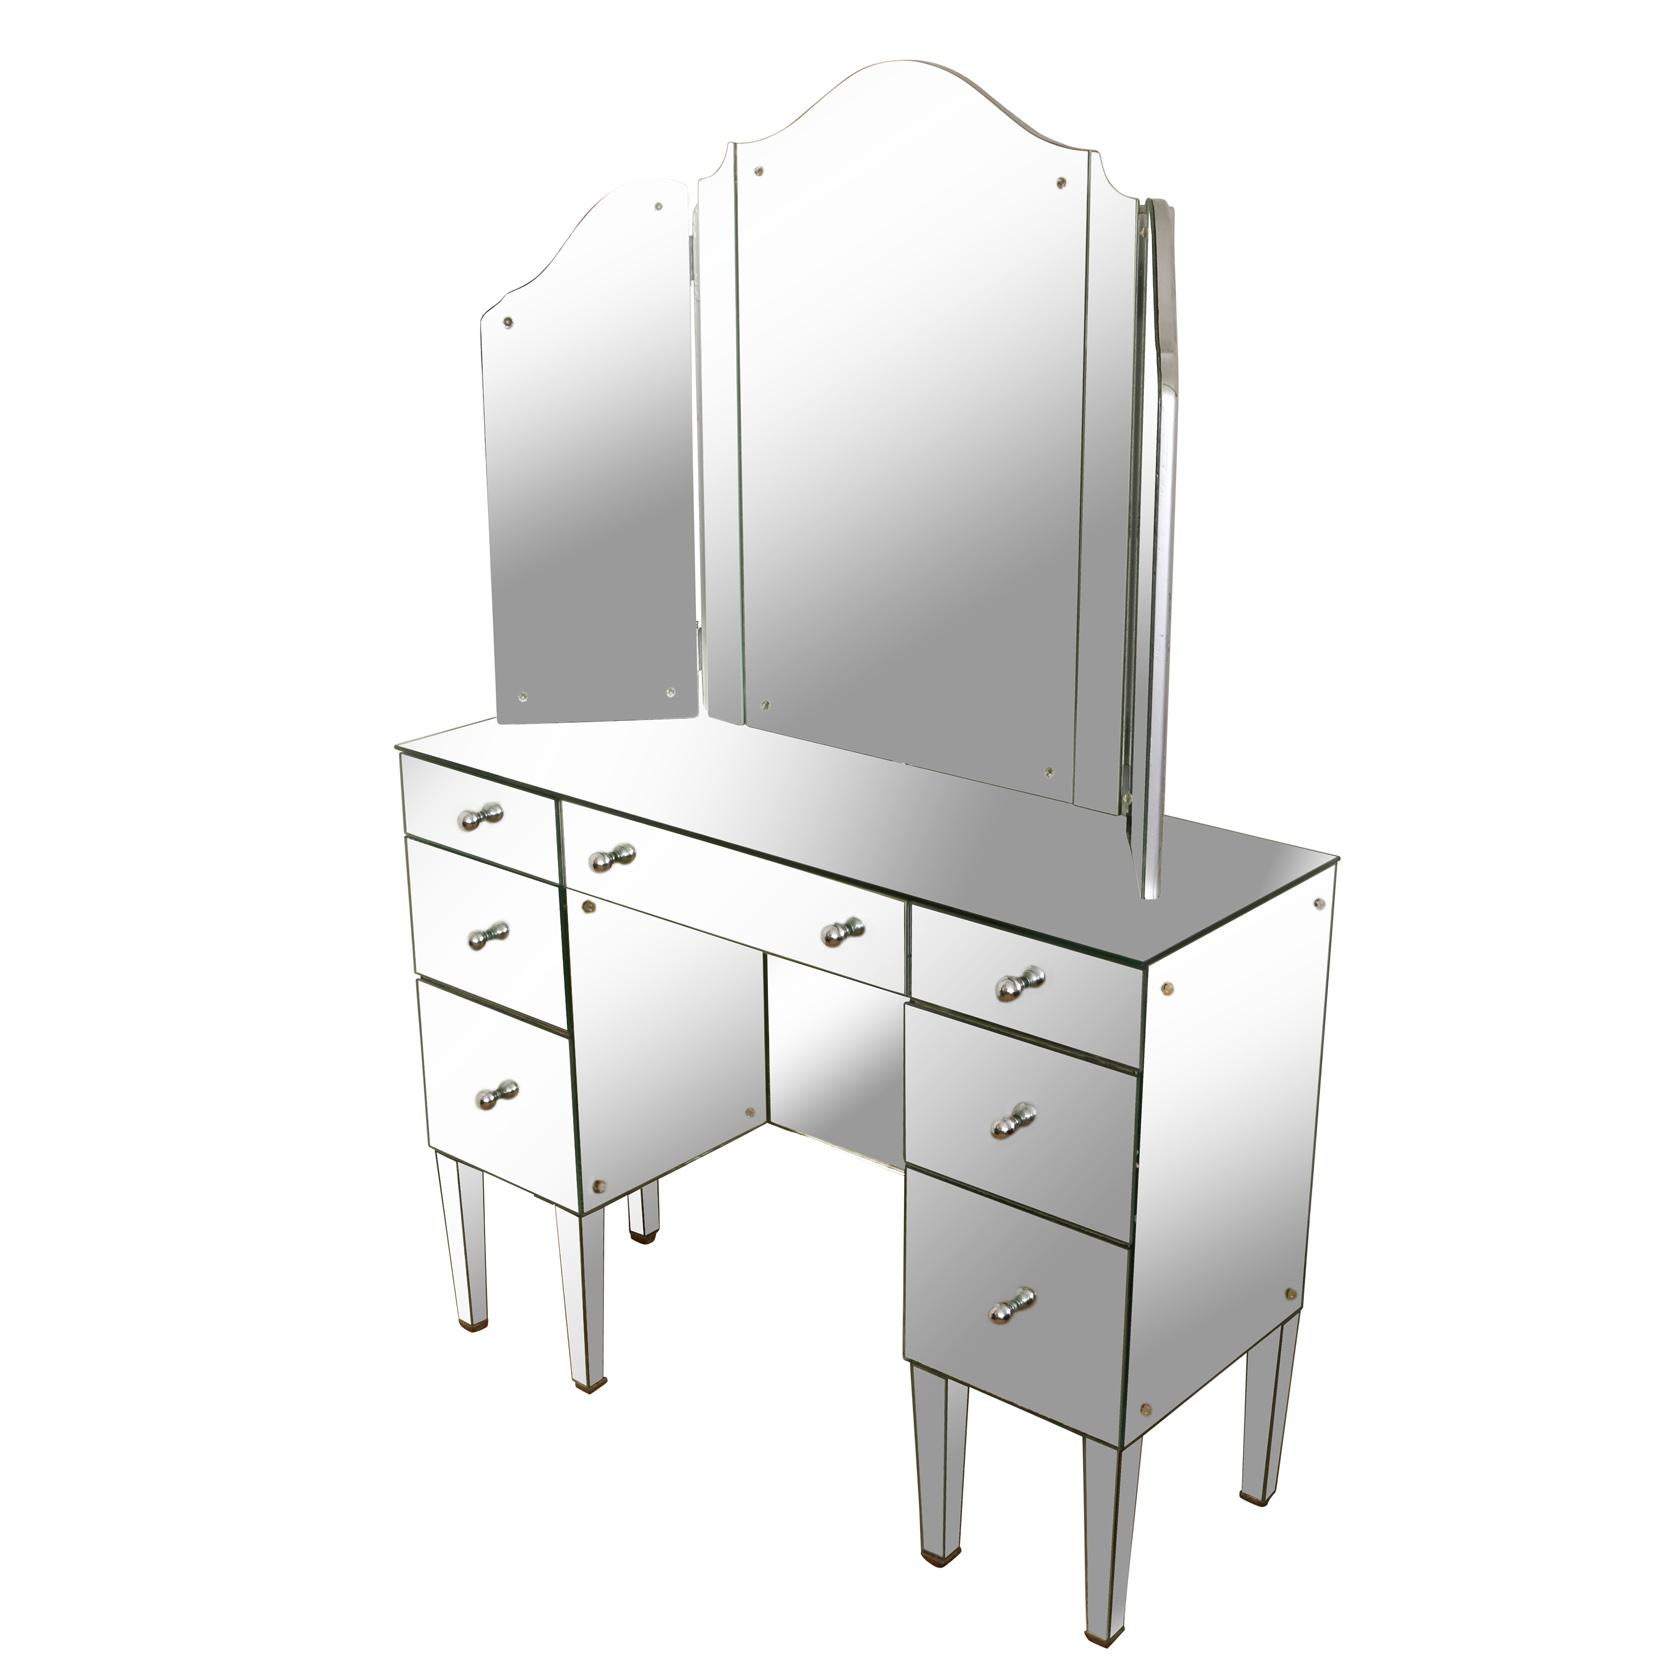 A vintage mirrored vanity table with trifold mirror attached to vanity desk top.  The seven drawer vanity table is fully clad in mirror with round polished chrome drawer knobs.  The arched tri fold mirror that sits on the table top completes the Art